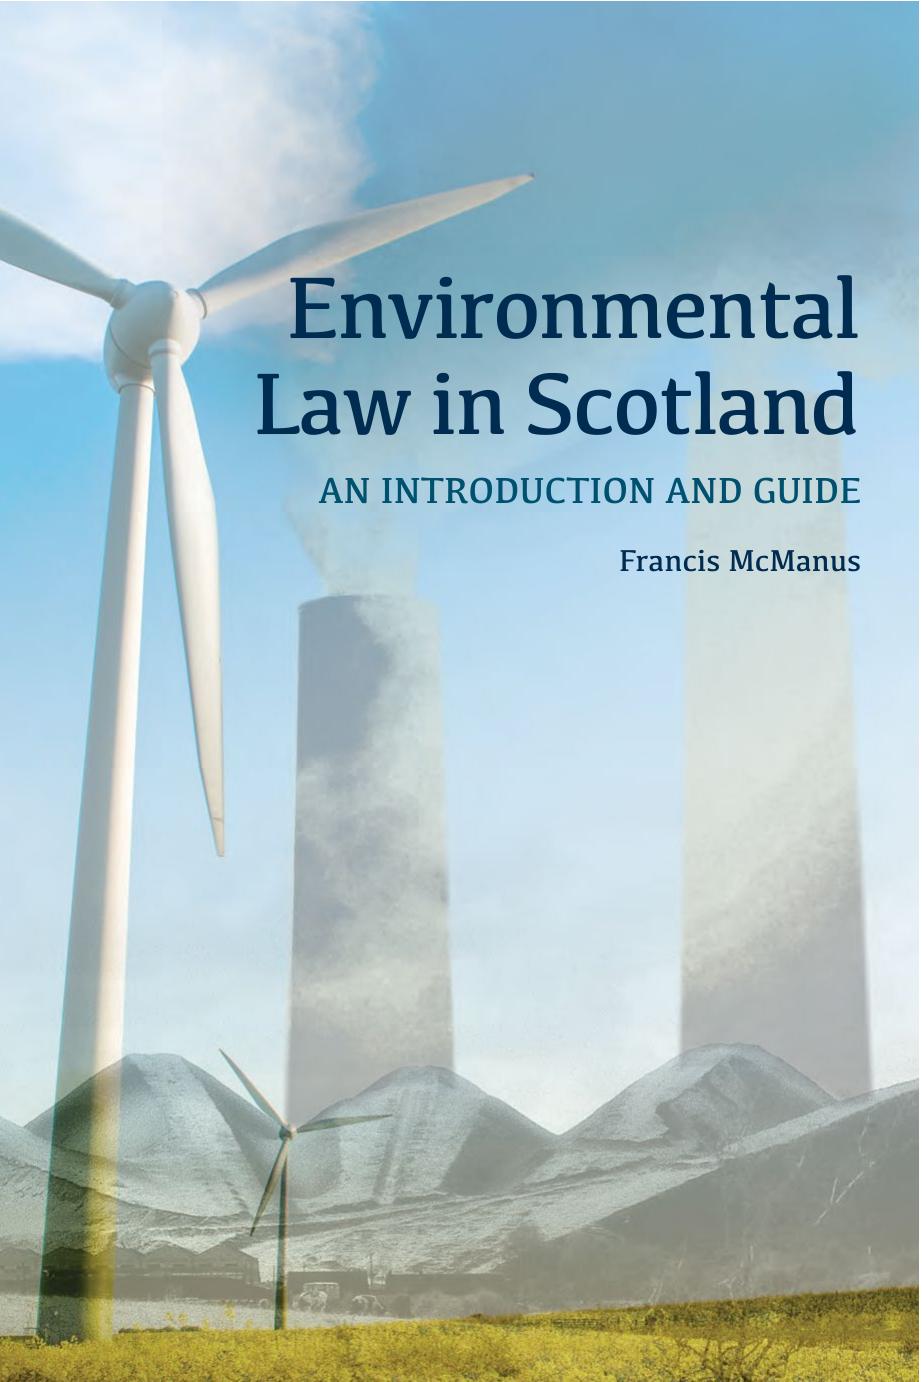 Environmental Law in Scotland : An Introduction and Guide by Francis McManus